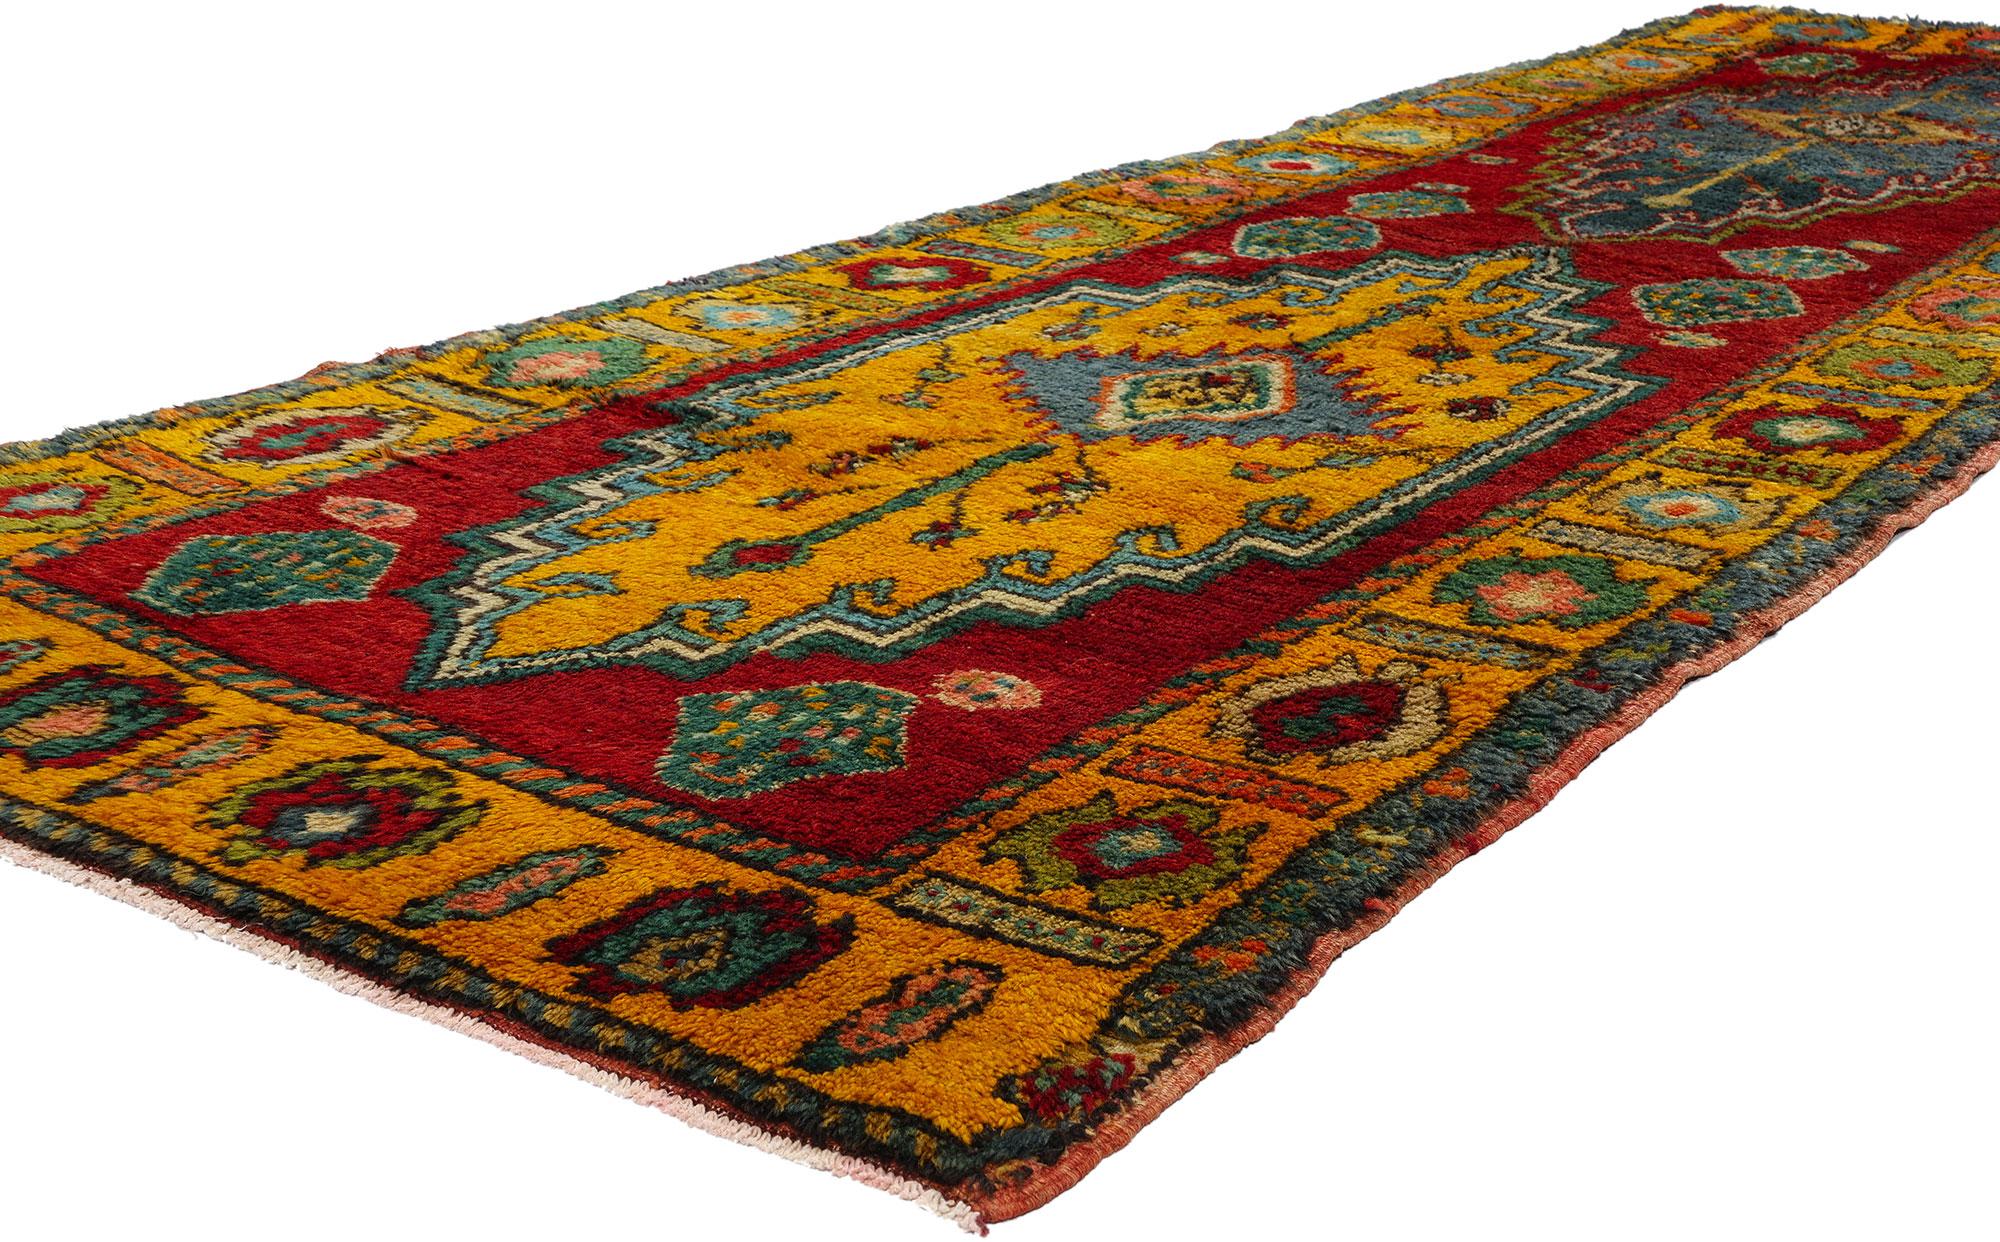 53904 Vintage Tribal Kurdish Rug Runner, 03'09 x 11'04. Handcrafted with precision and dedication by Kurdish Herki tribes in eastern Turkey, notably in the Hakkari province, Kurdish rugs are celebrated for their distinctive geometric patterns and